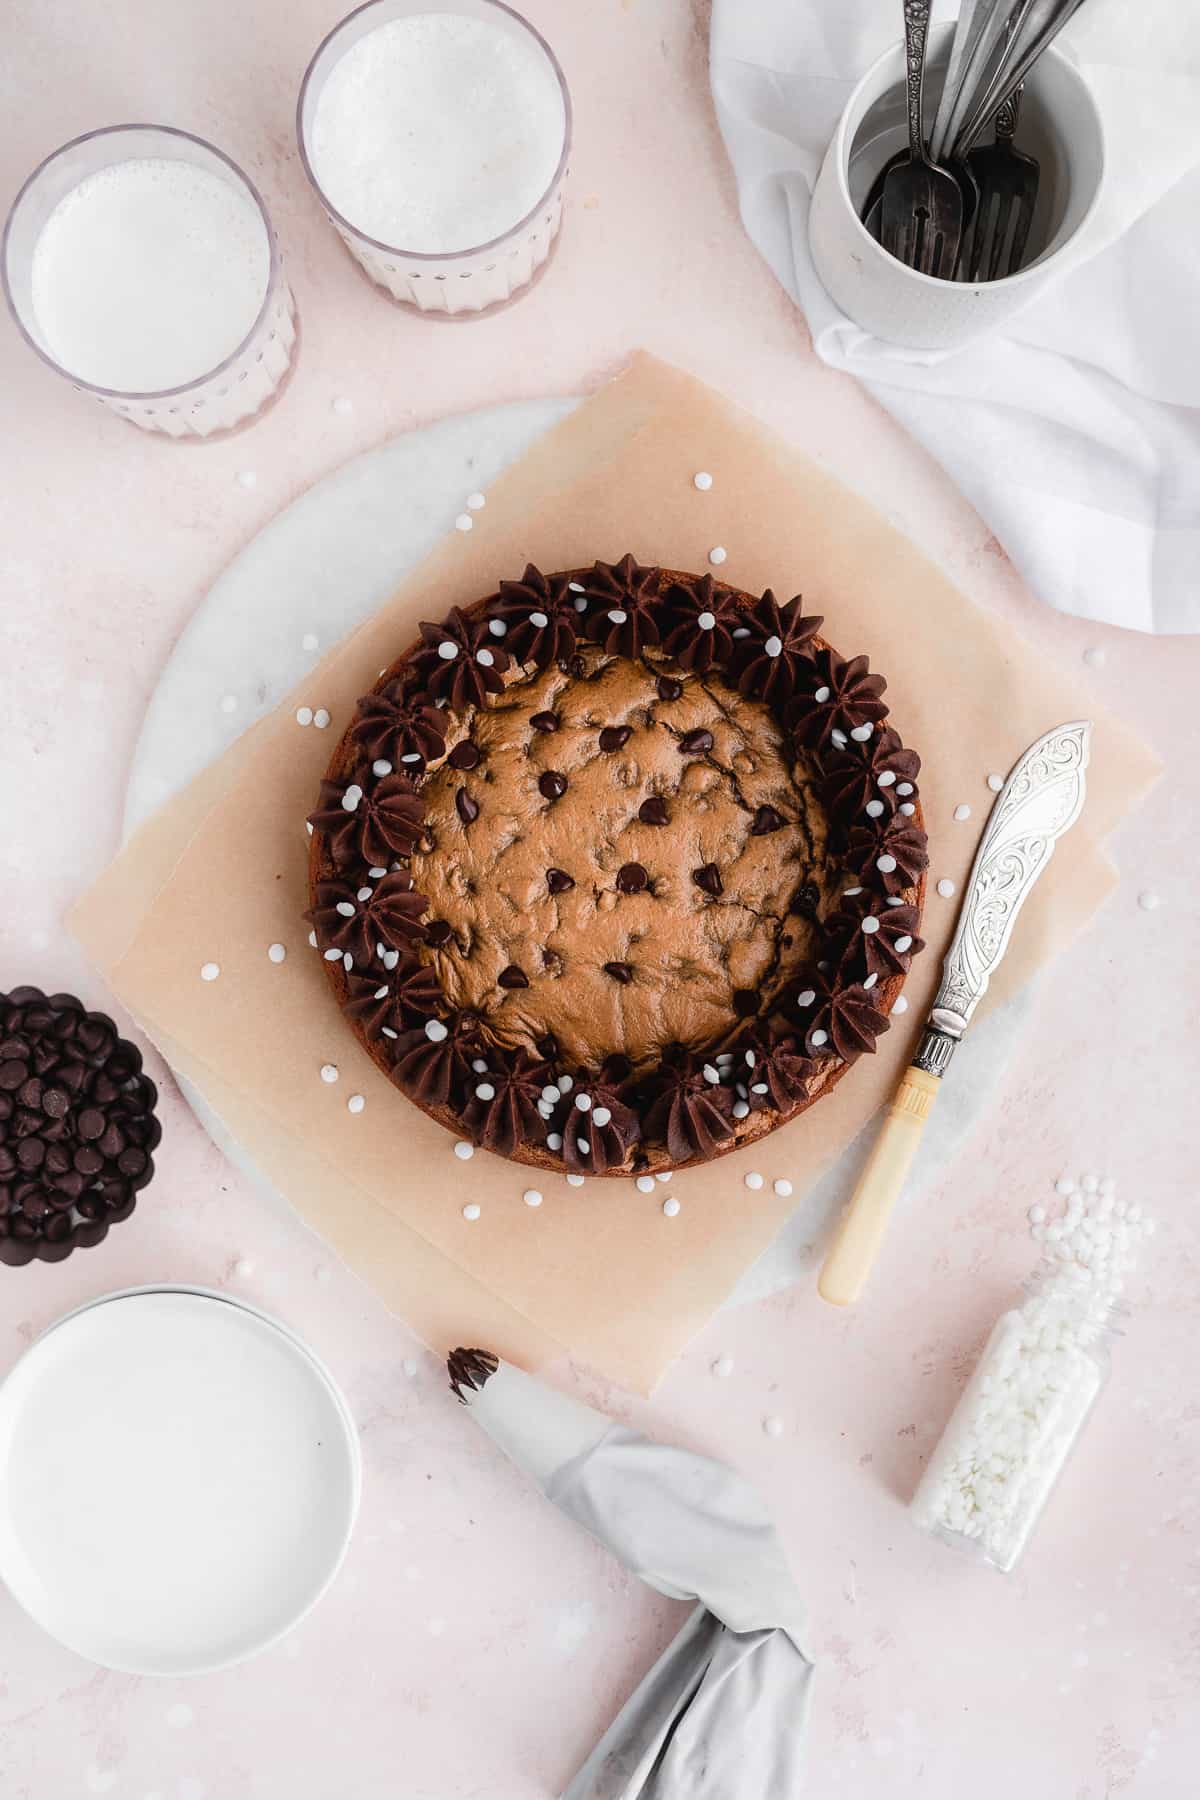 Overhead view of chocolate chip cookie cake sitting on parchment paper and a marble slab.  Decorative knife is resting beside the cake.   Two glasses of milk, cup with multiple spoons, small dessert plates and bowl of chocolate chips are nearby.  